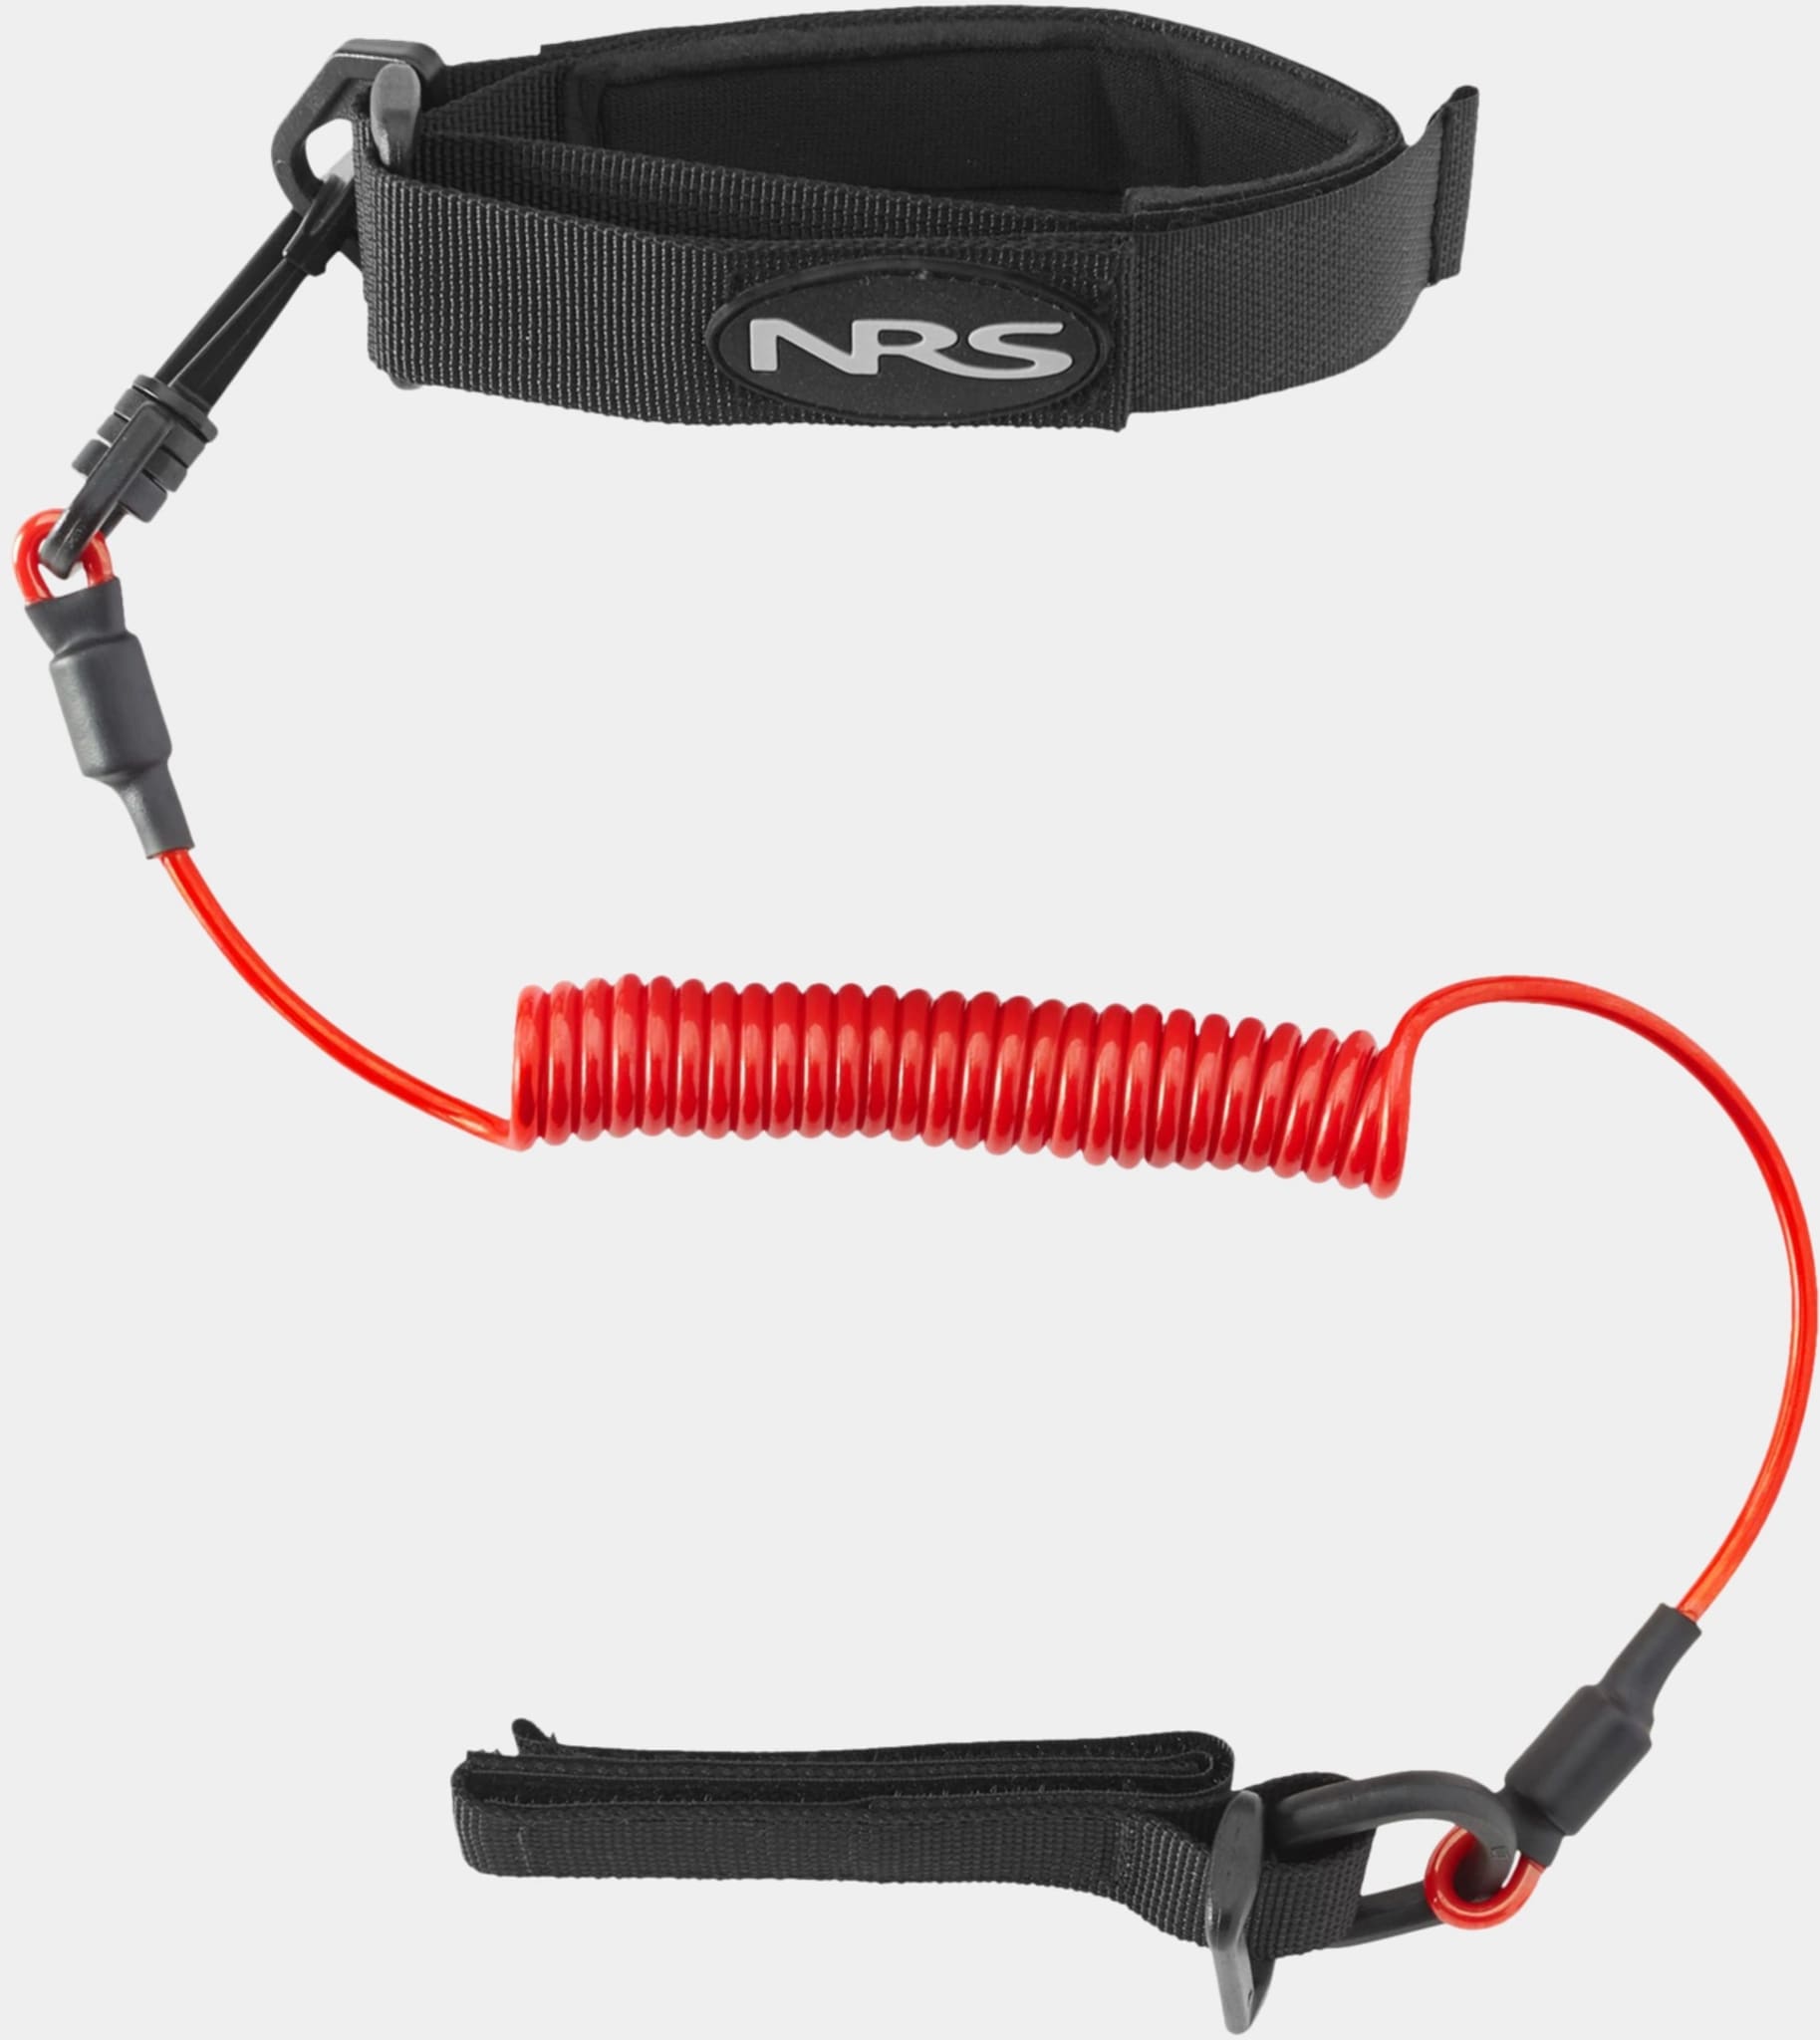 NRS Coil paddle leash